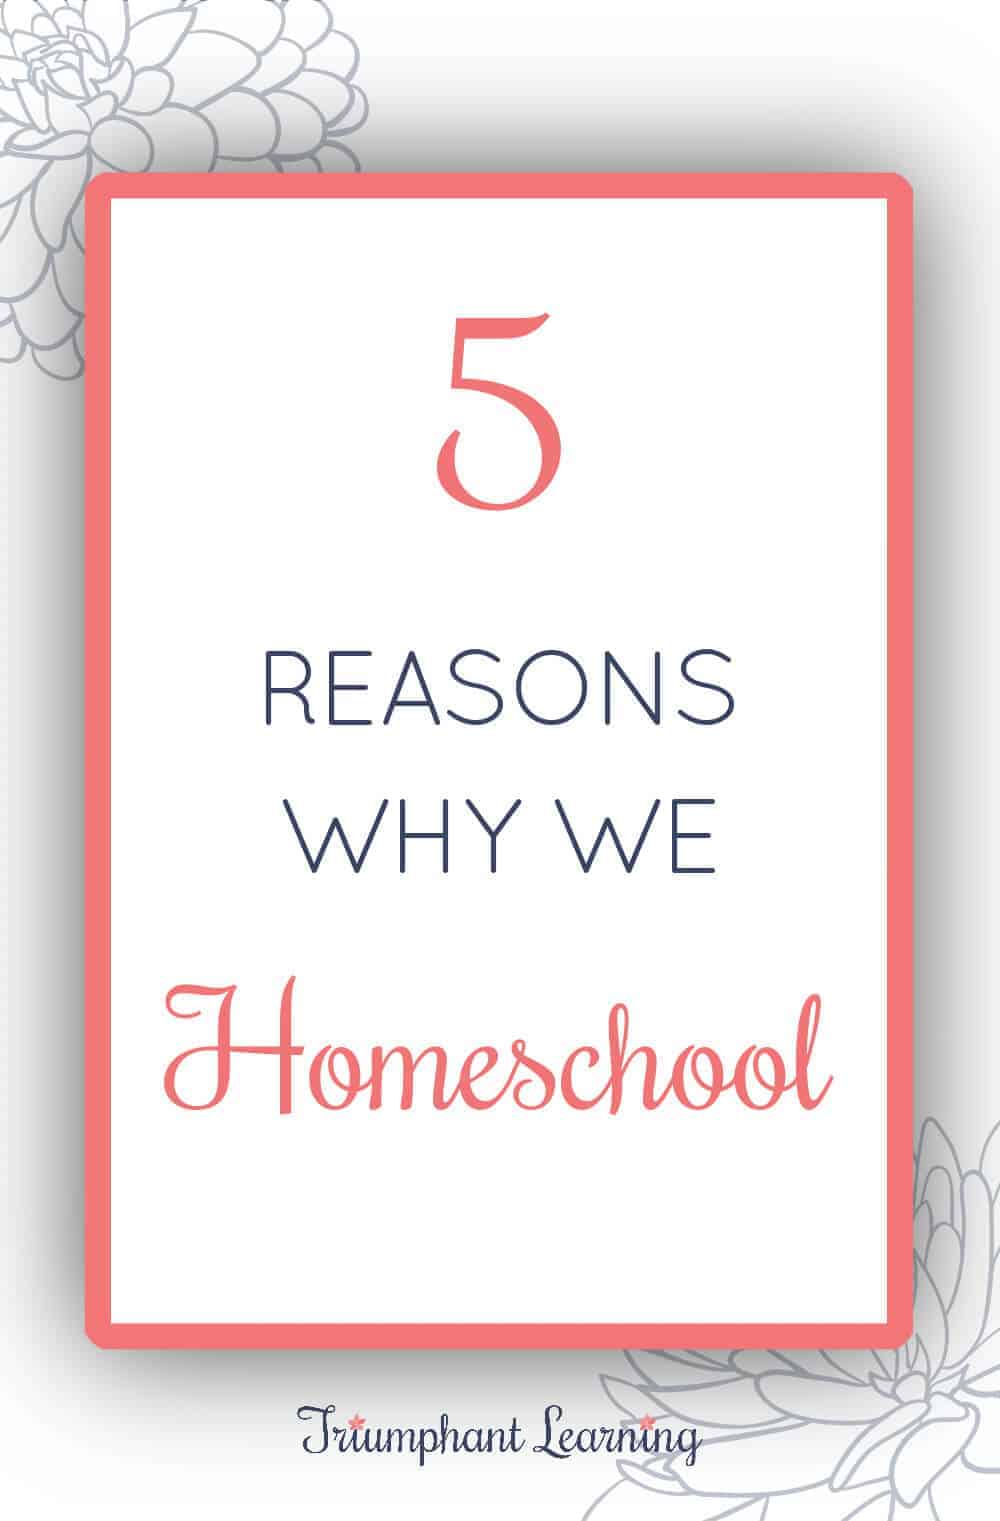 Having a clear vision of why you homeschool helps you persevere through challenges. Here are five reasons why we homeschool. via @TriLearning